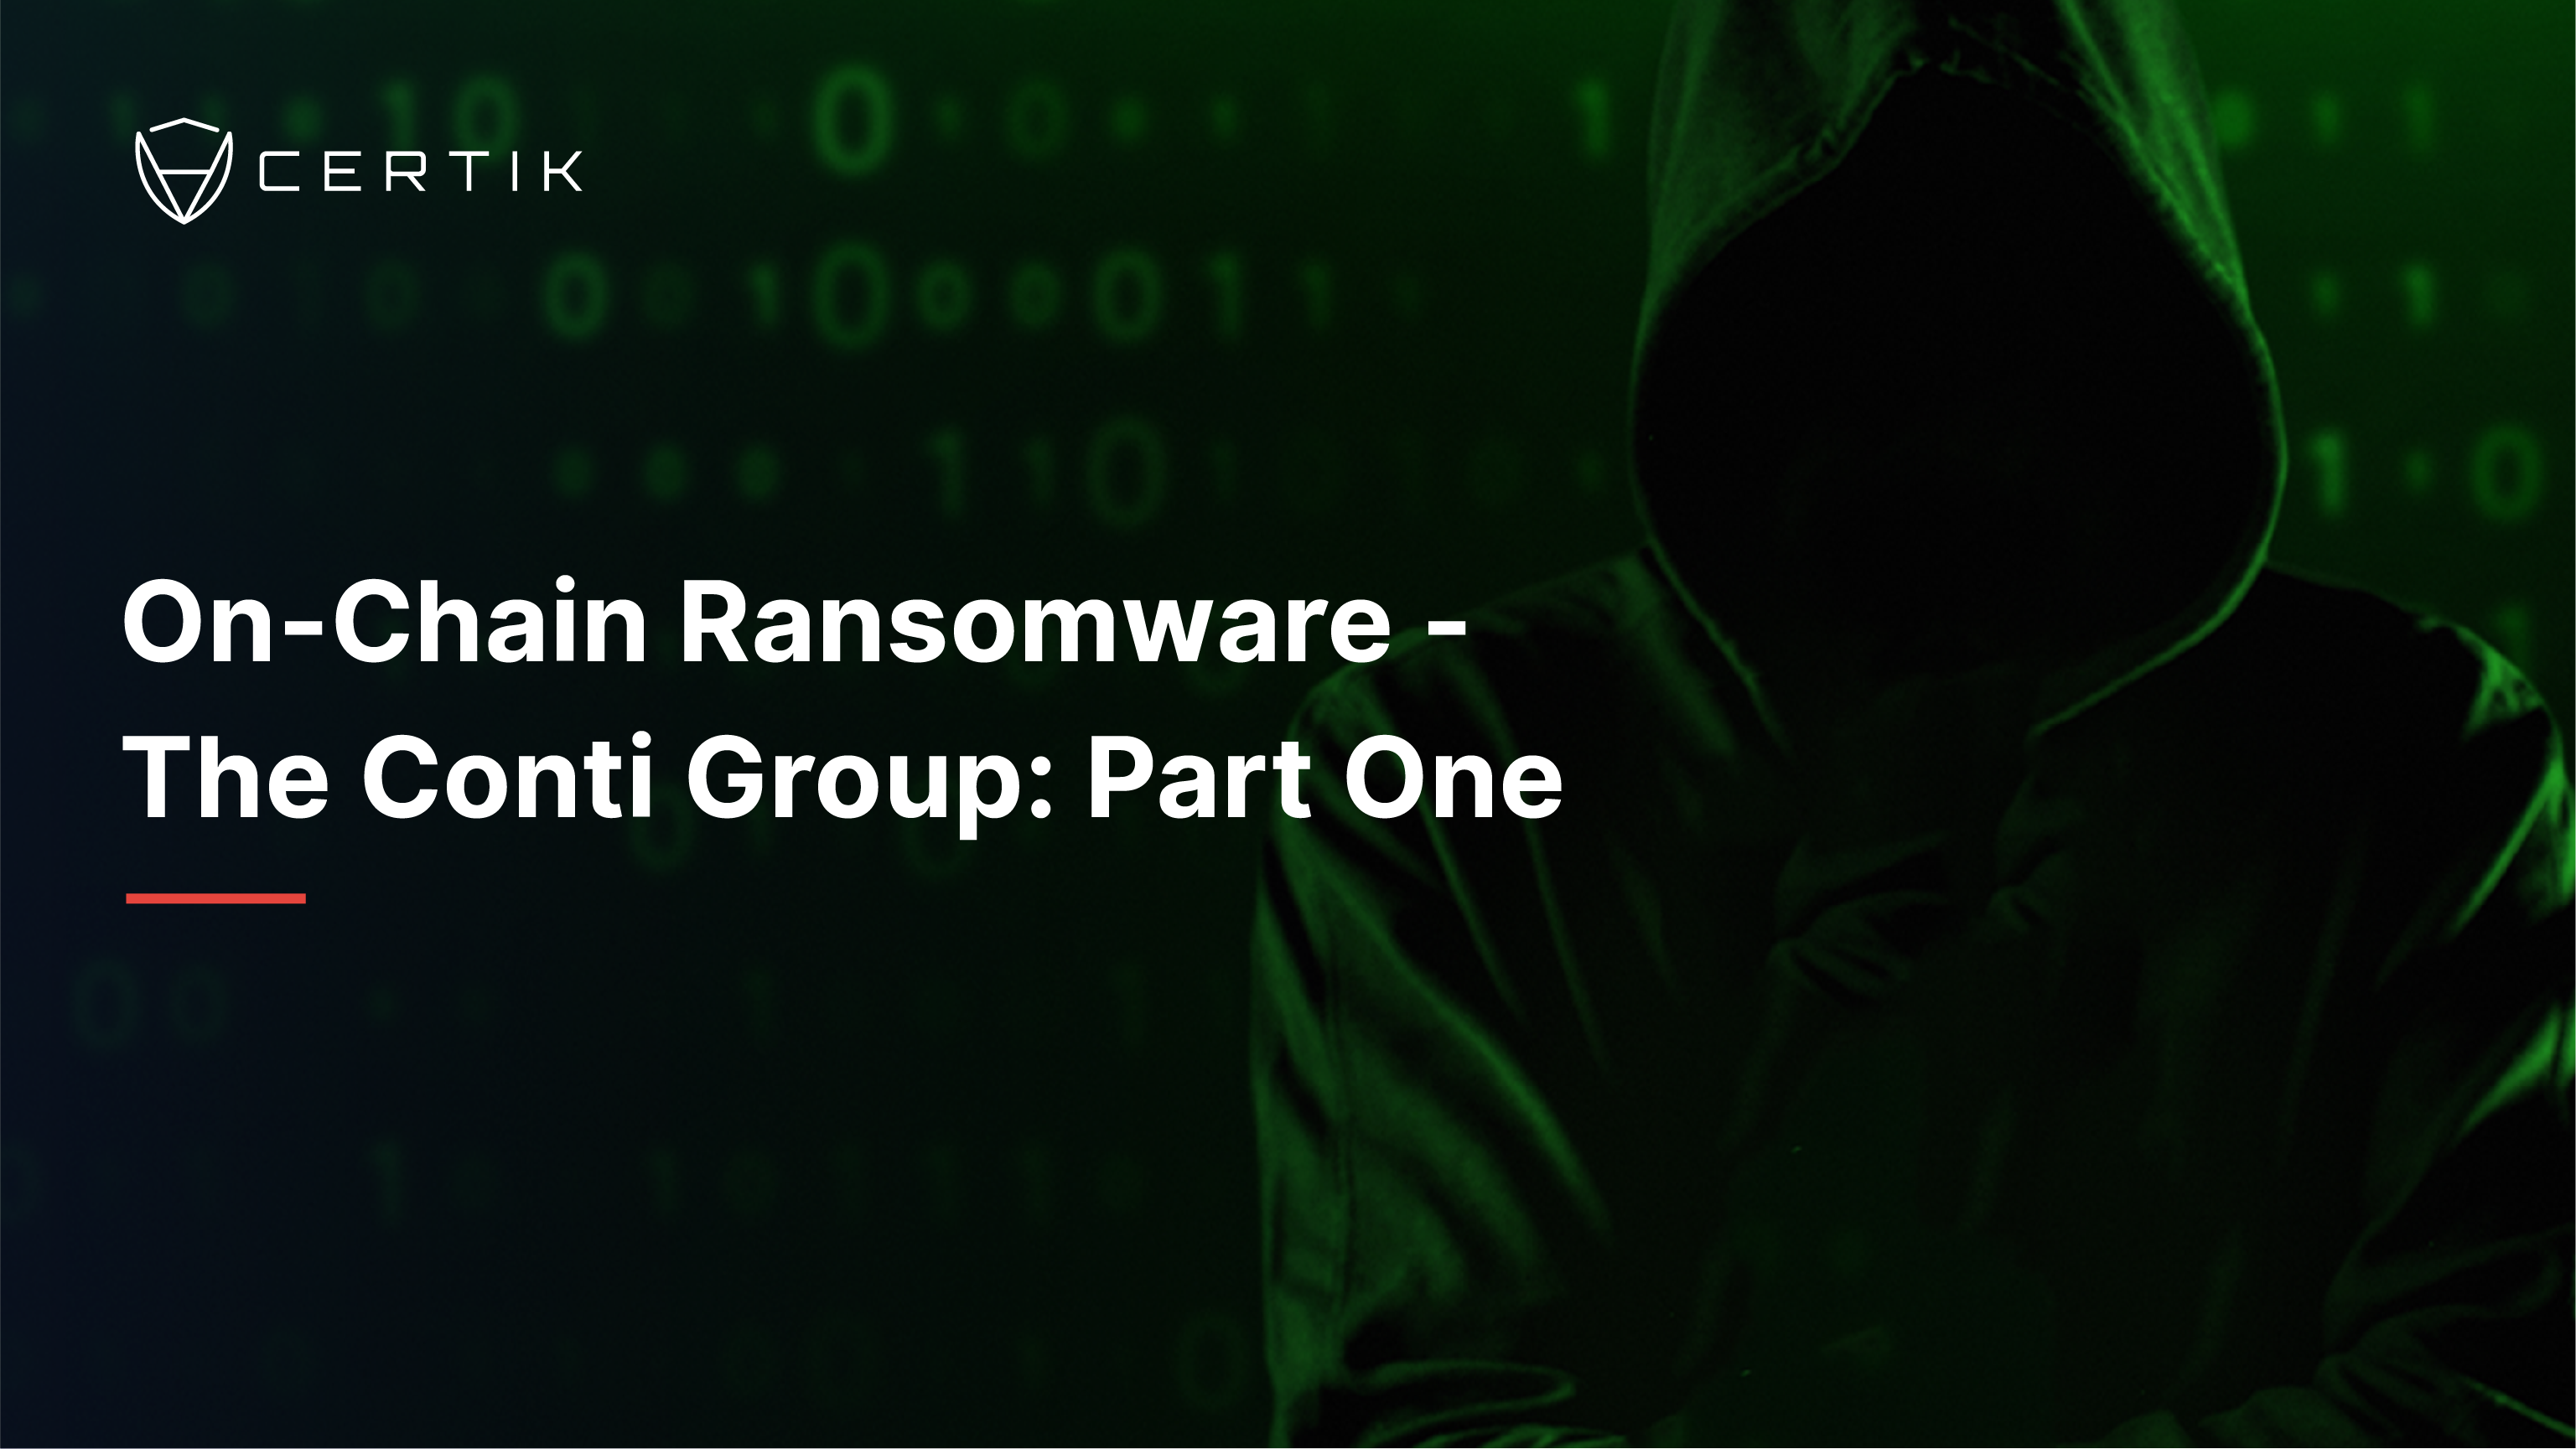 On-Chain Ransomware - The Conti Group: Part One